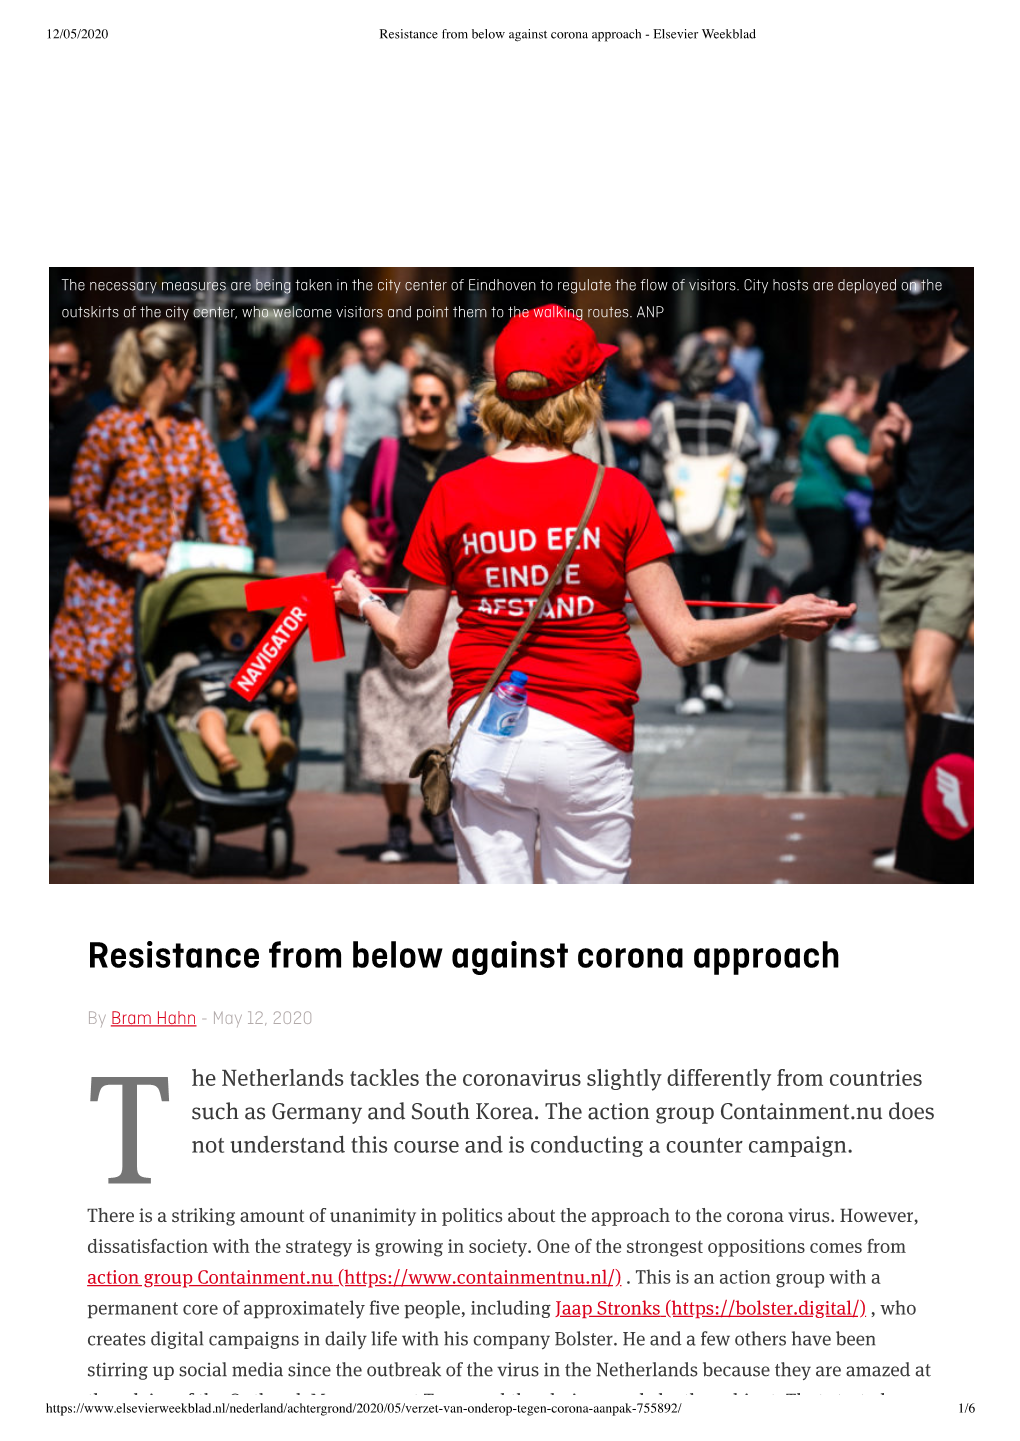 Resistance from Below Against Corona Approach - Elsevier Weekblad